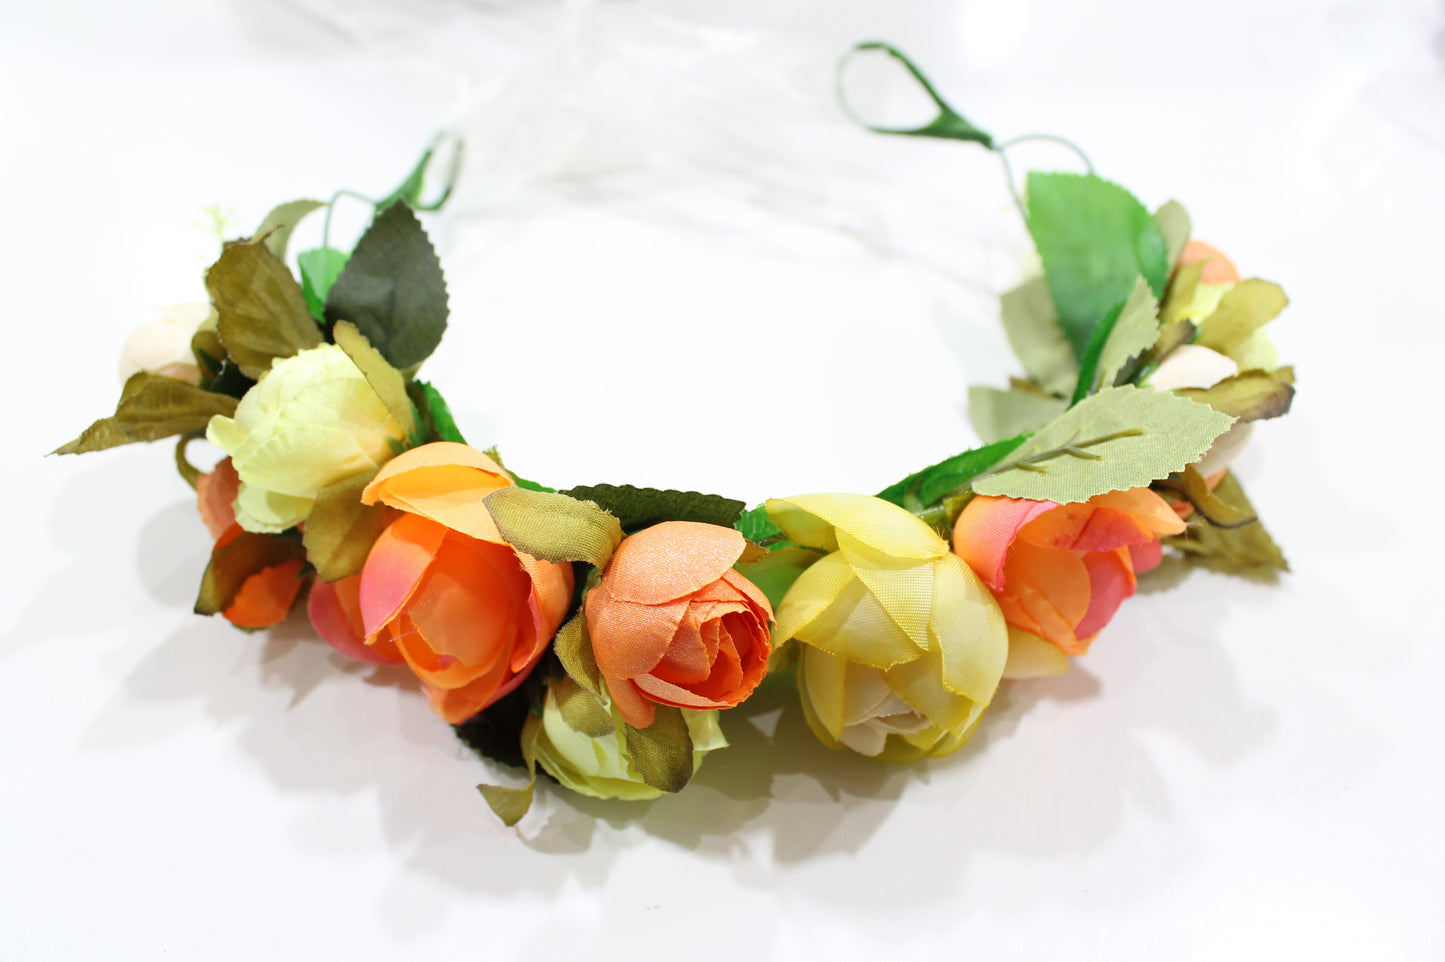 Orange and Yellow Floral Hair Crown